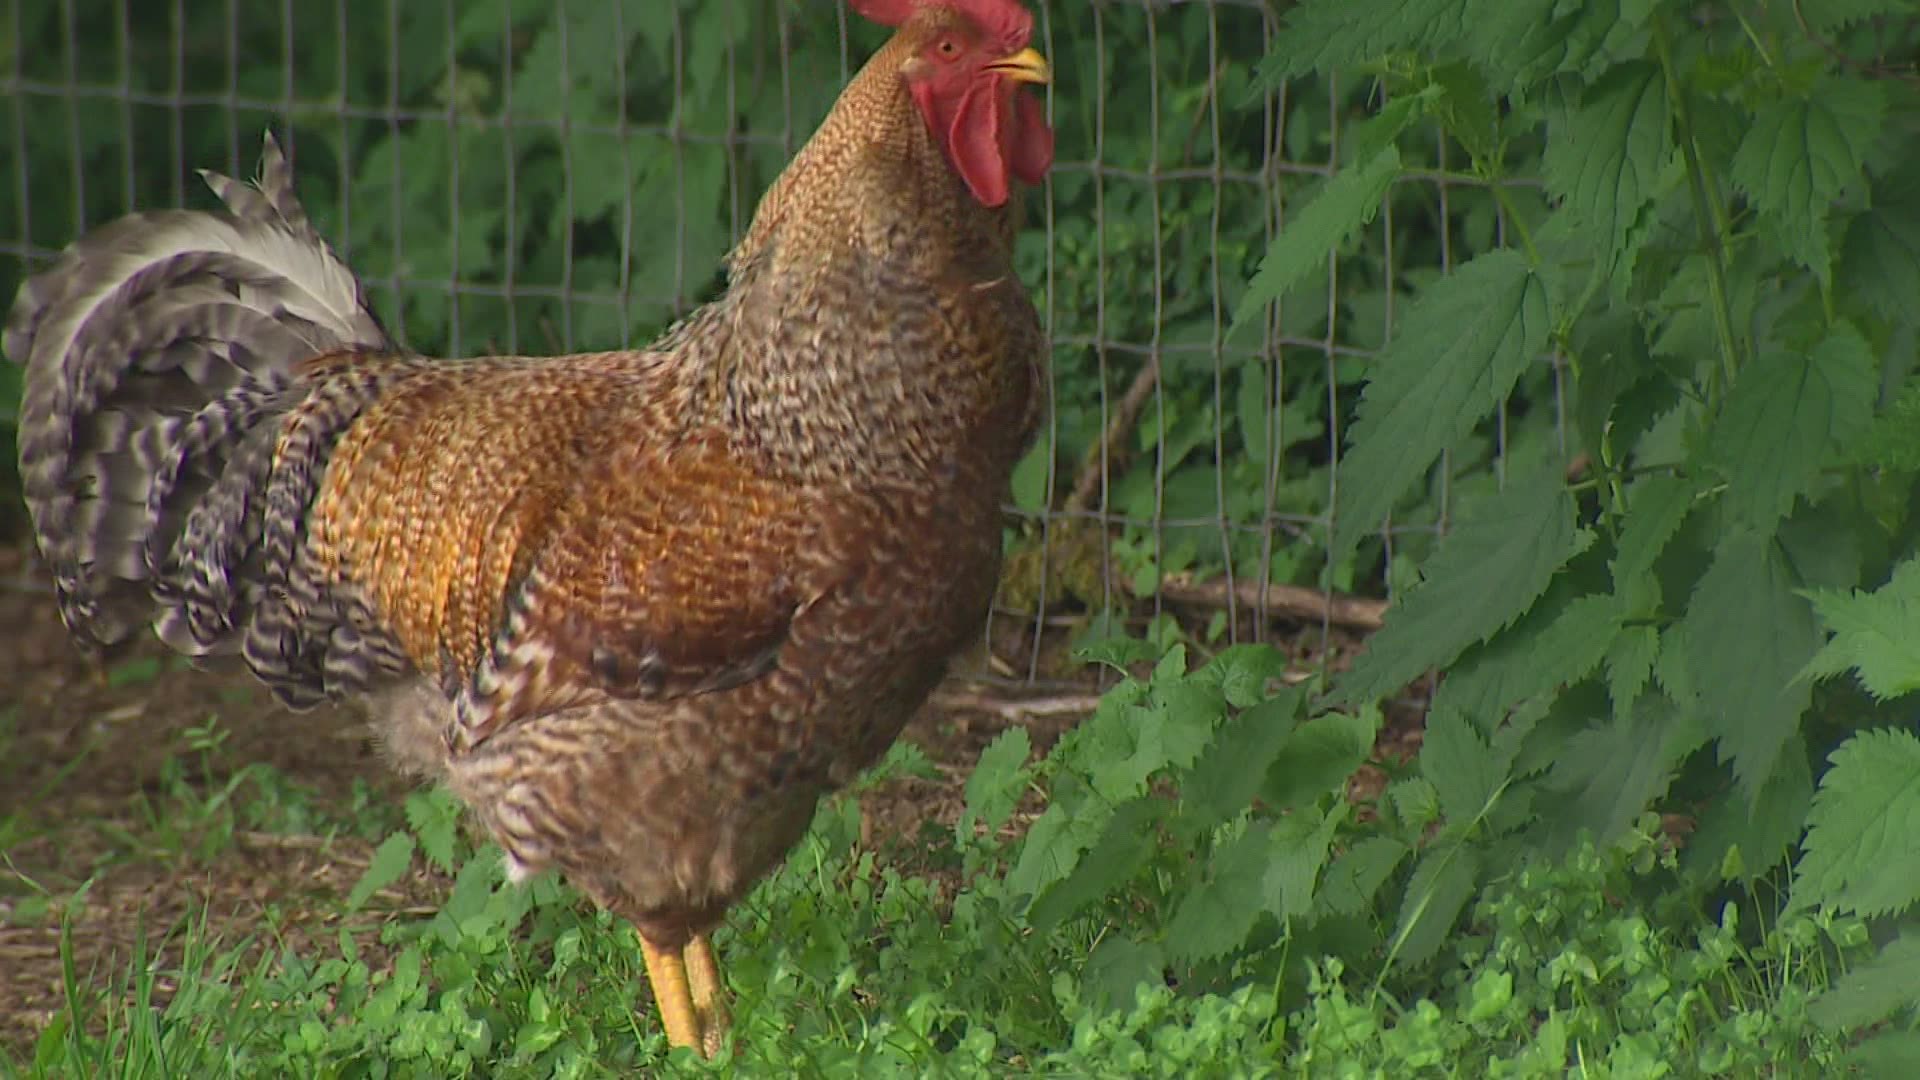 A city ordinance prohibits rooster ownership in some neighborhoods, but the Johnson family is arguing they own a commercial farm and are protected by state law.